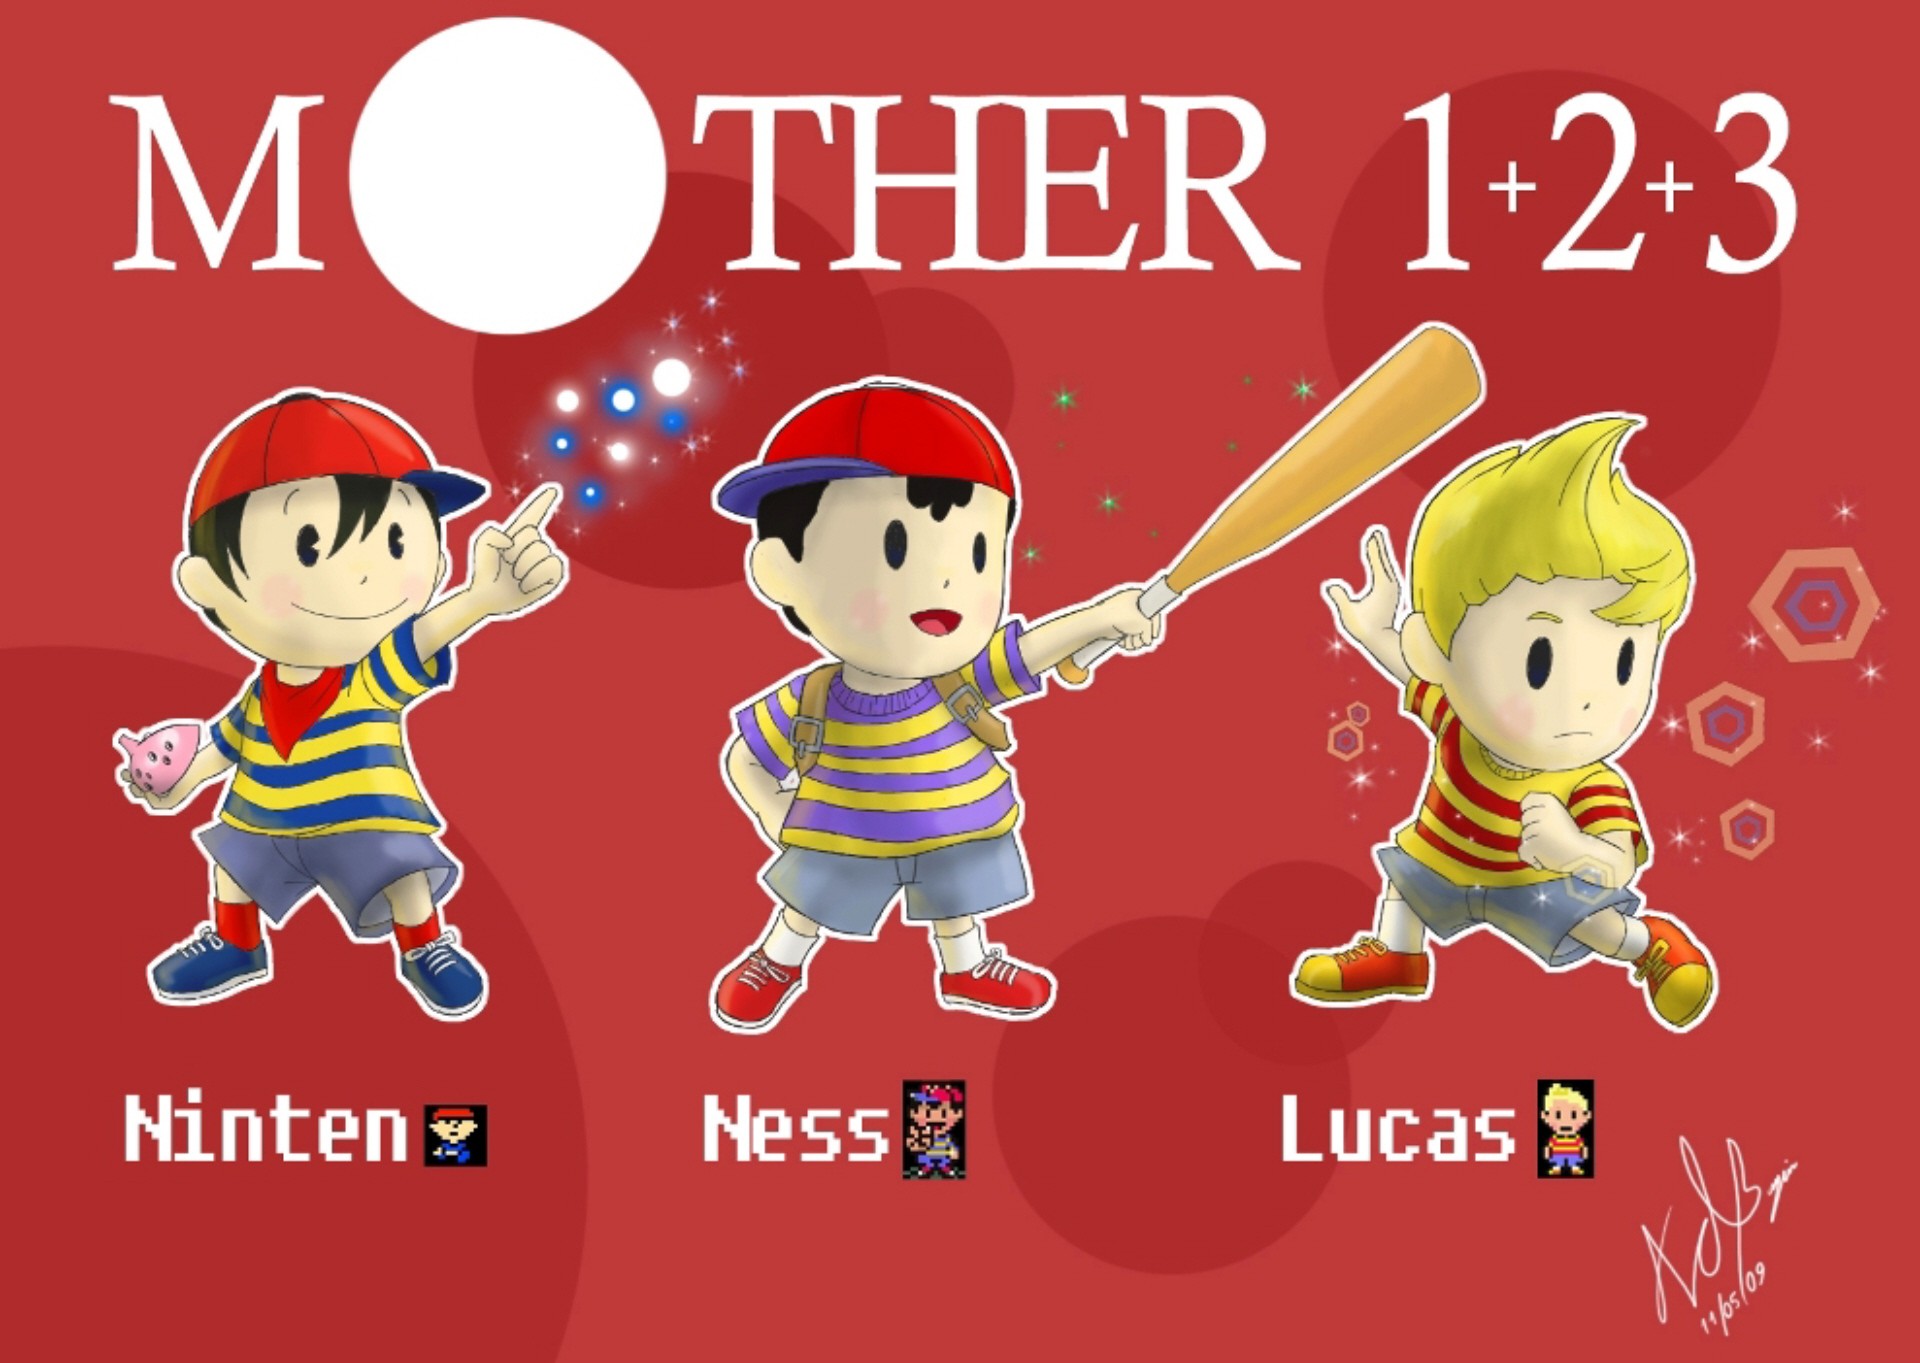 Mother 1 game. Несс Earthbound. Mother 1. Ness Lucas. Mother Earthbound.